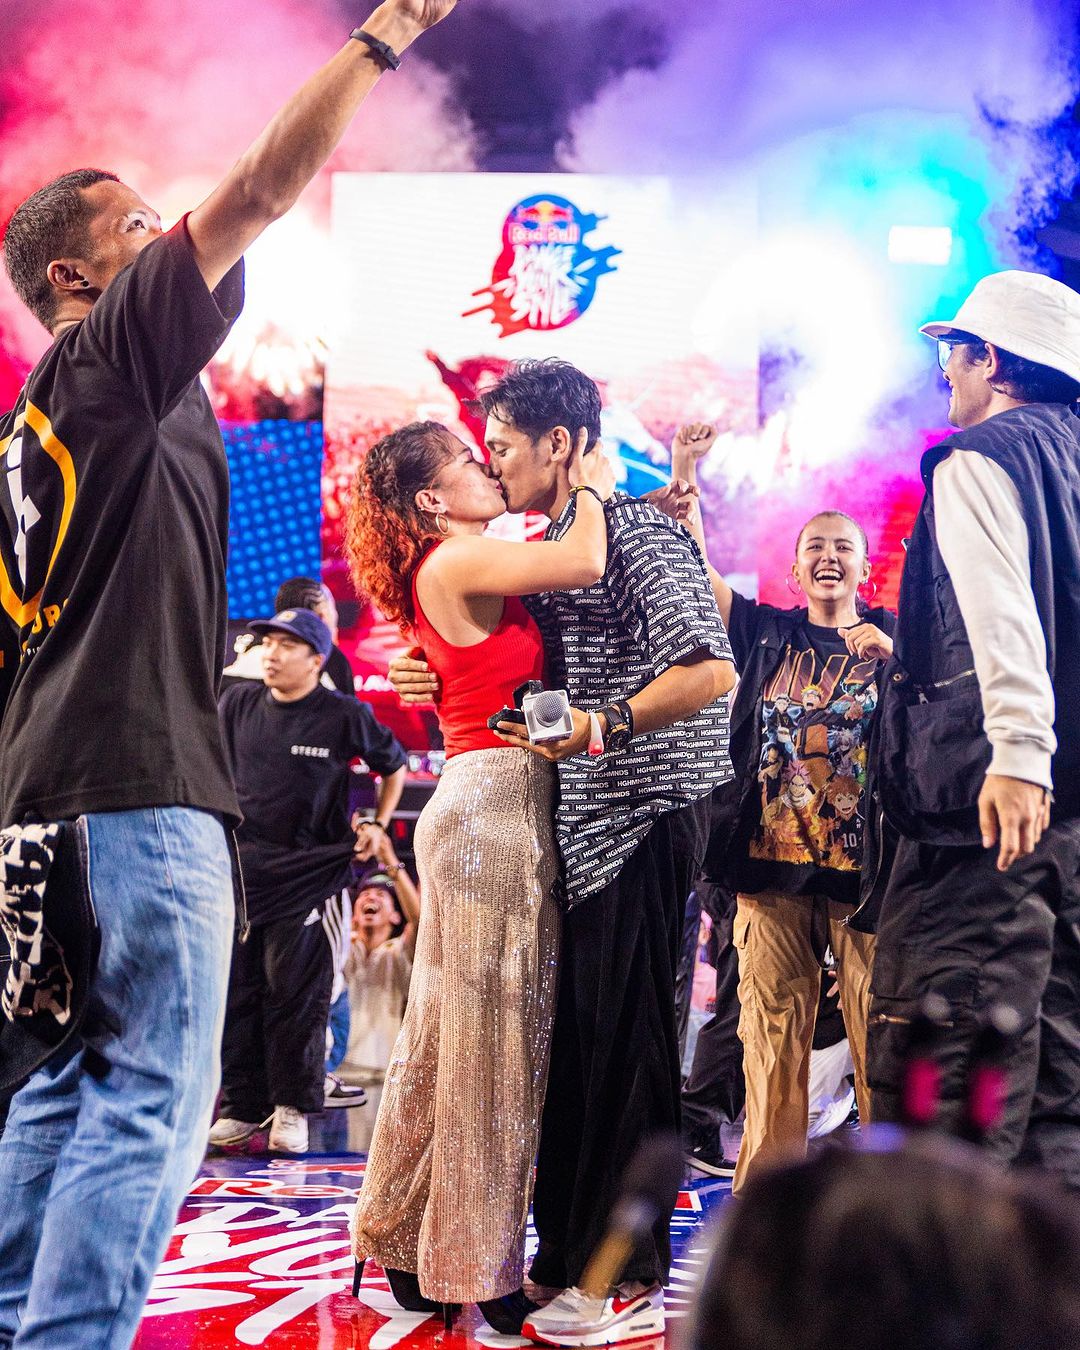 Keycee Velez' surprise marriage proposal in Red Bull Dance Your Style National Finals